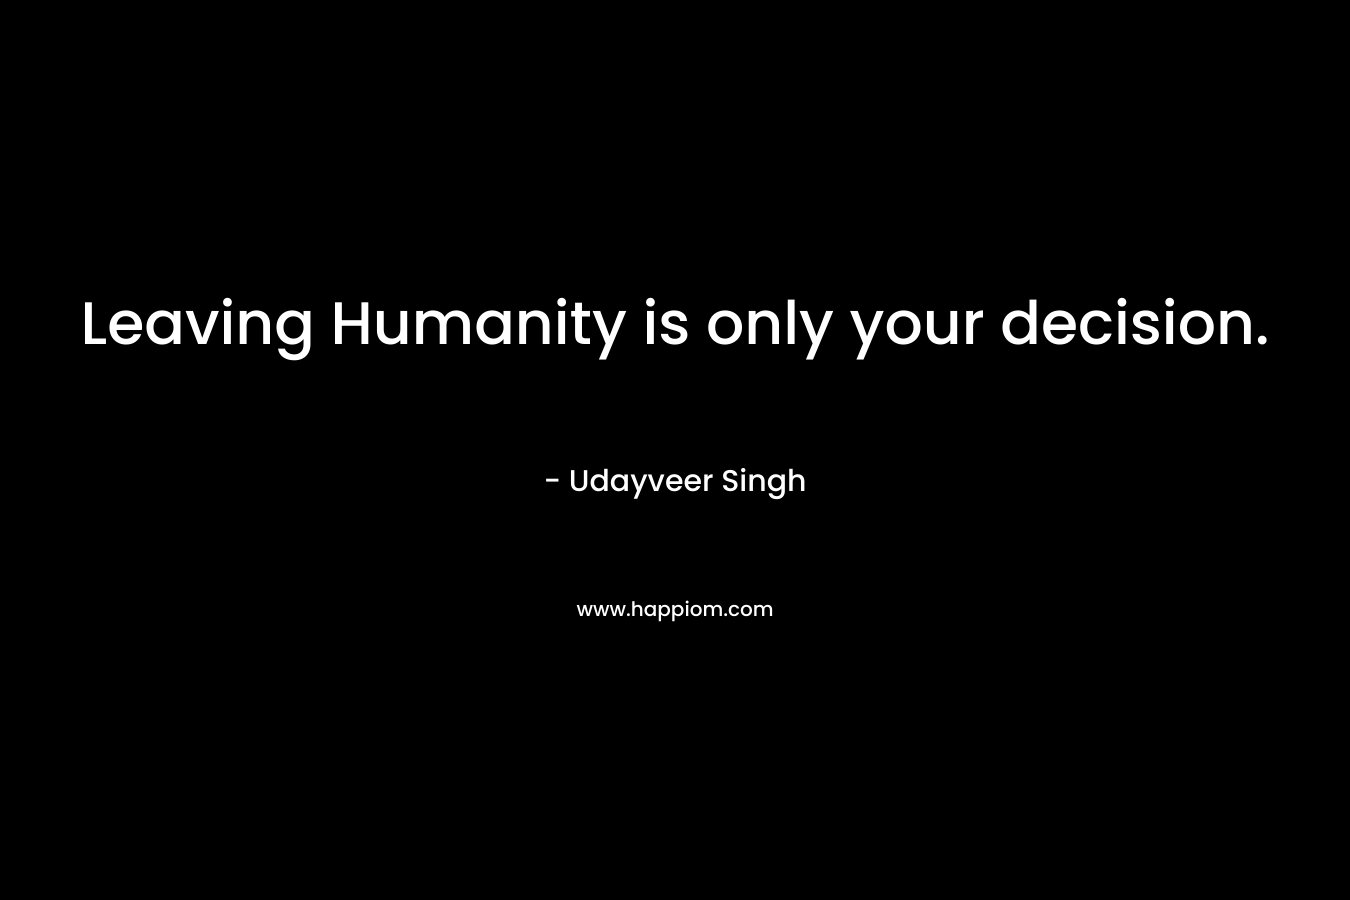 Leaving Humanity is only your decision.